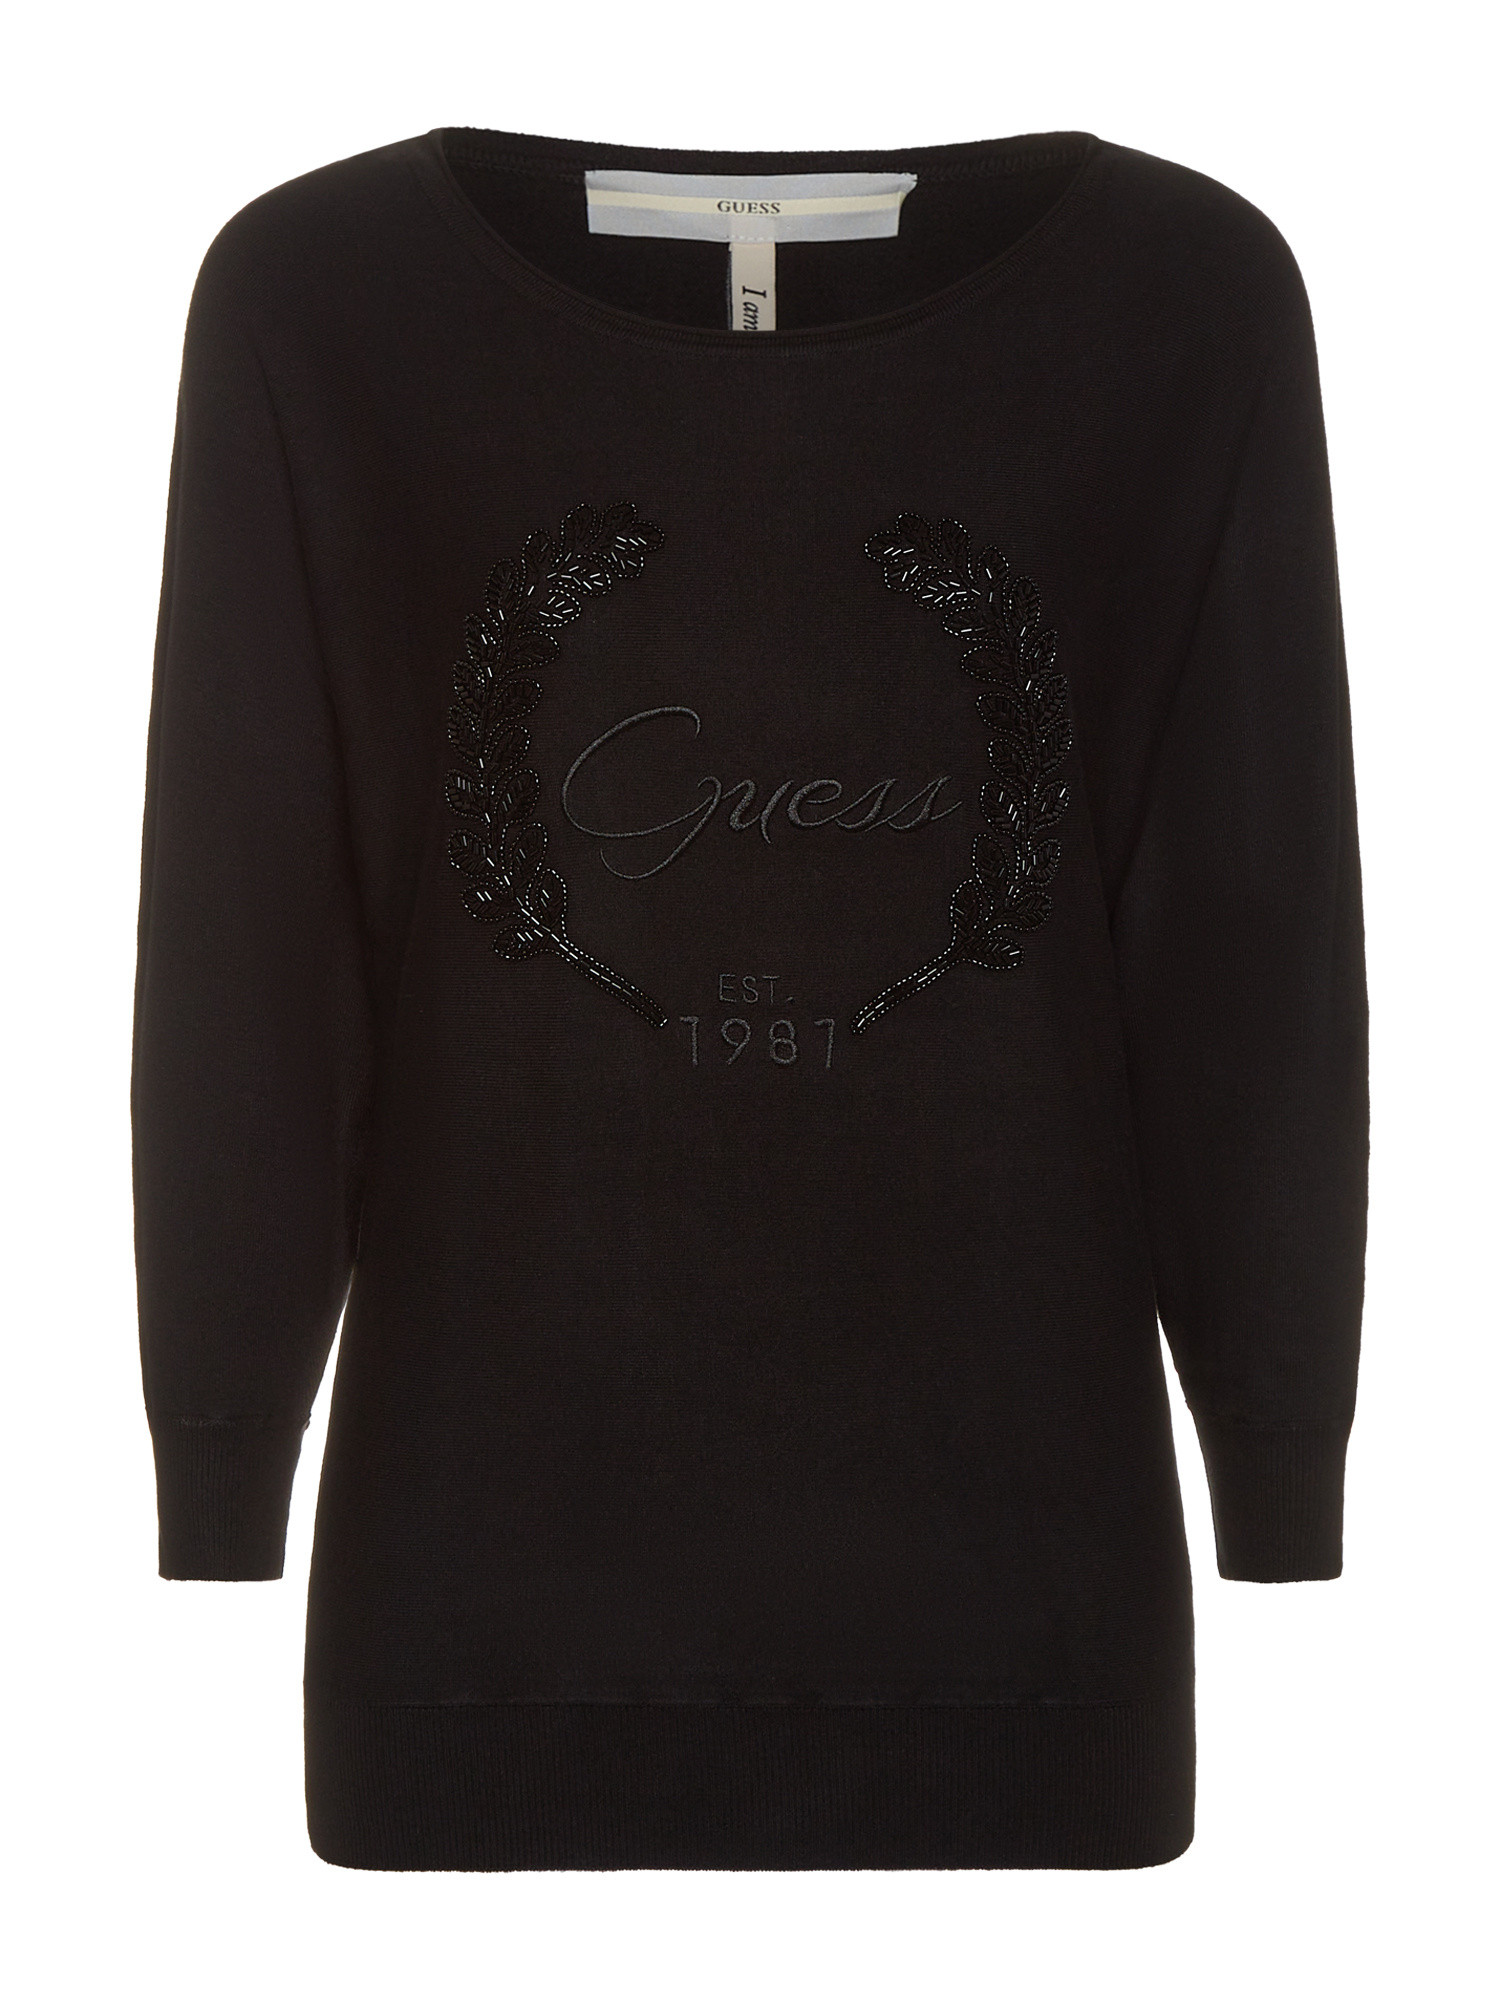 Guess - Maglione con logo, Nero, large image number 0